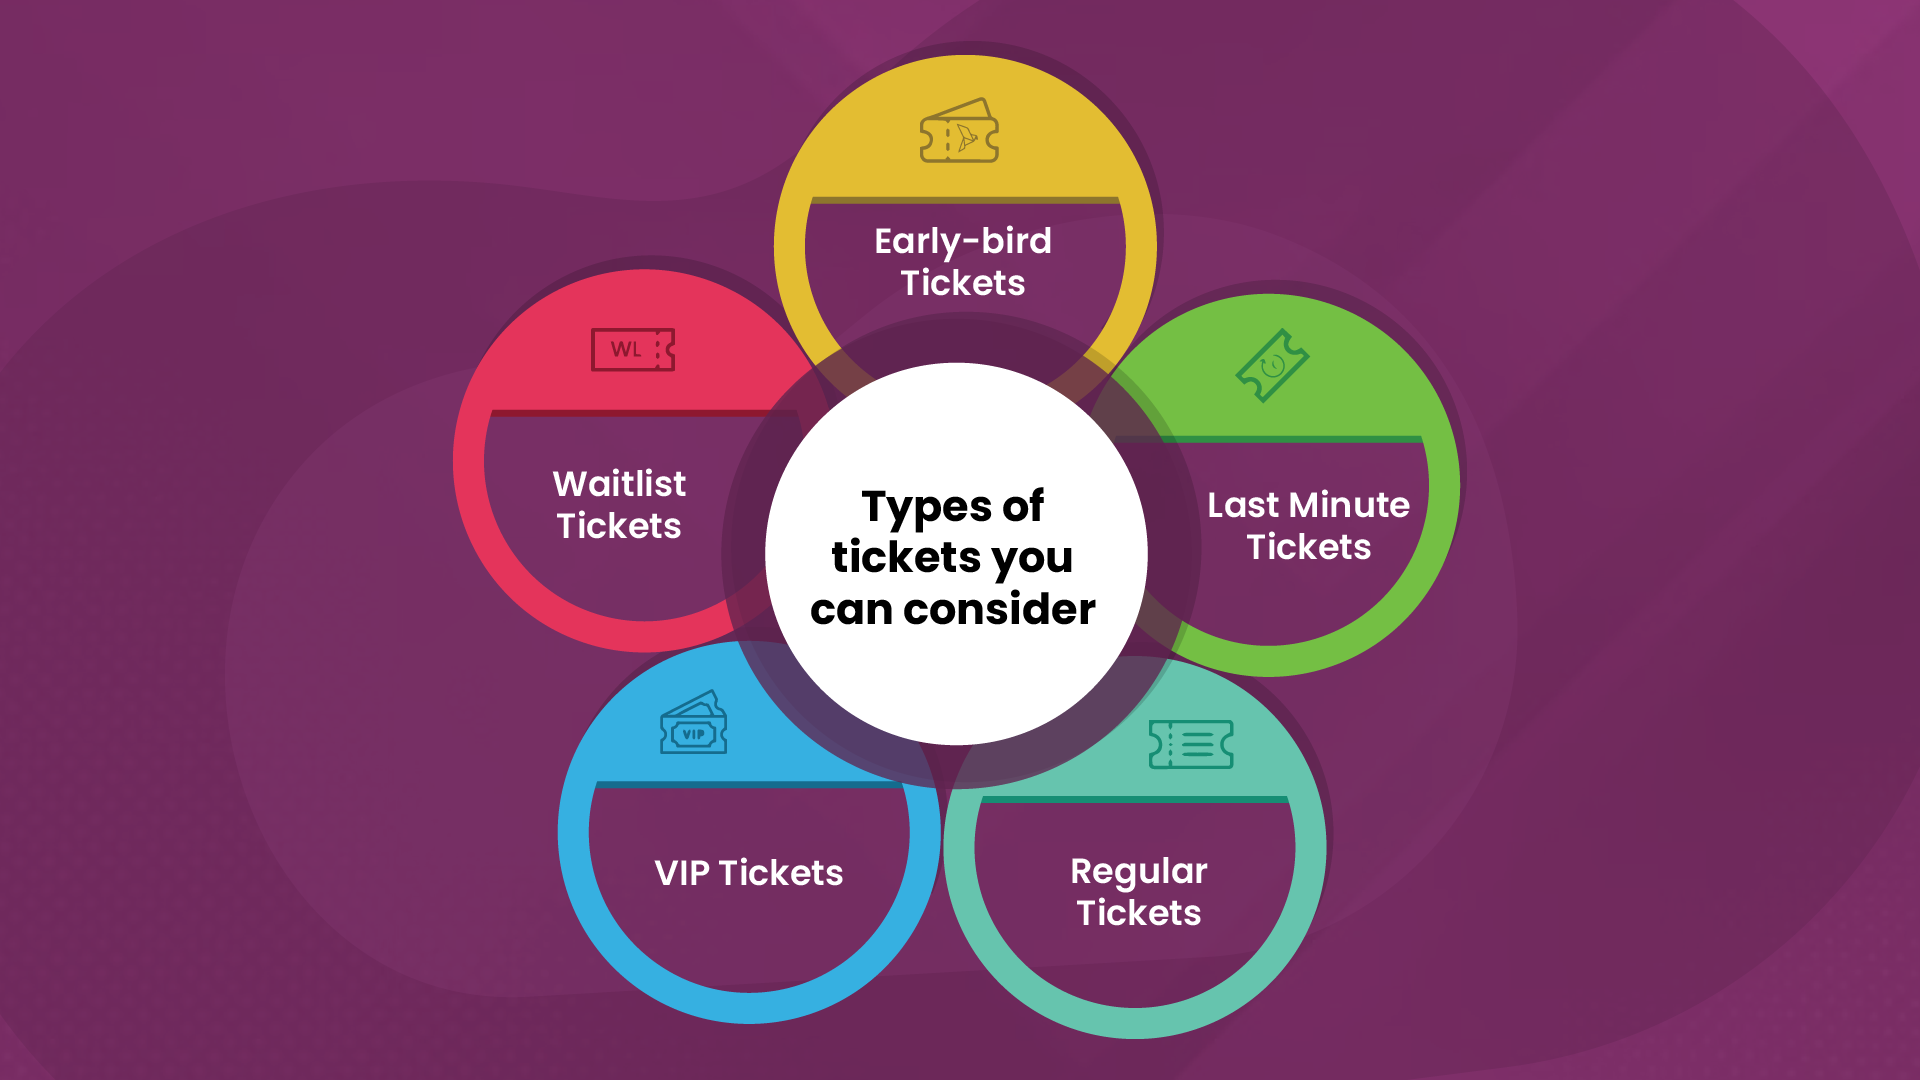 Experiment with various ticketing options